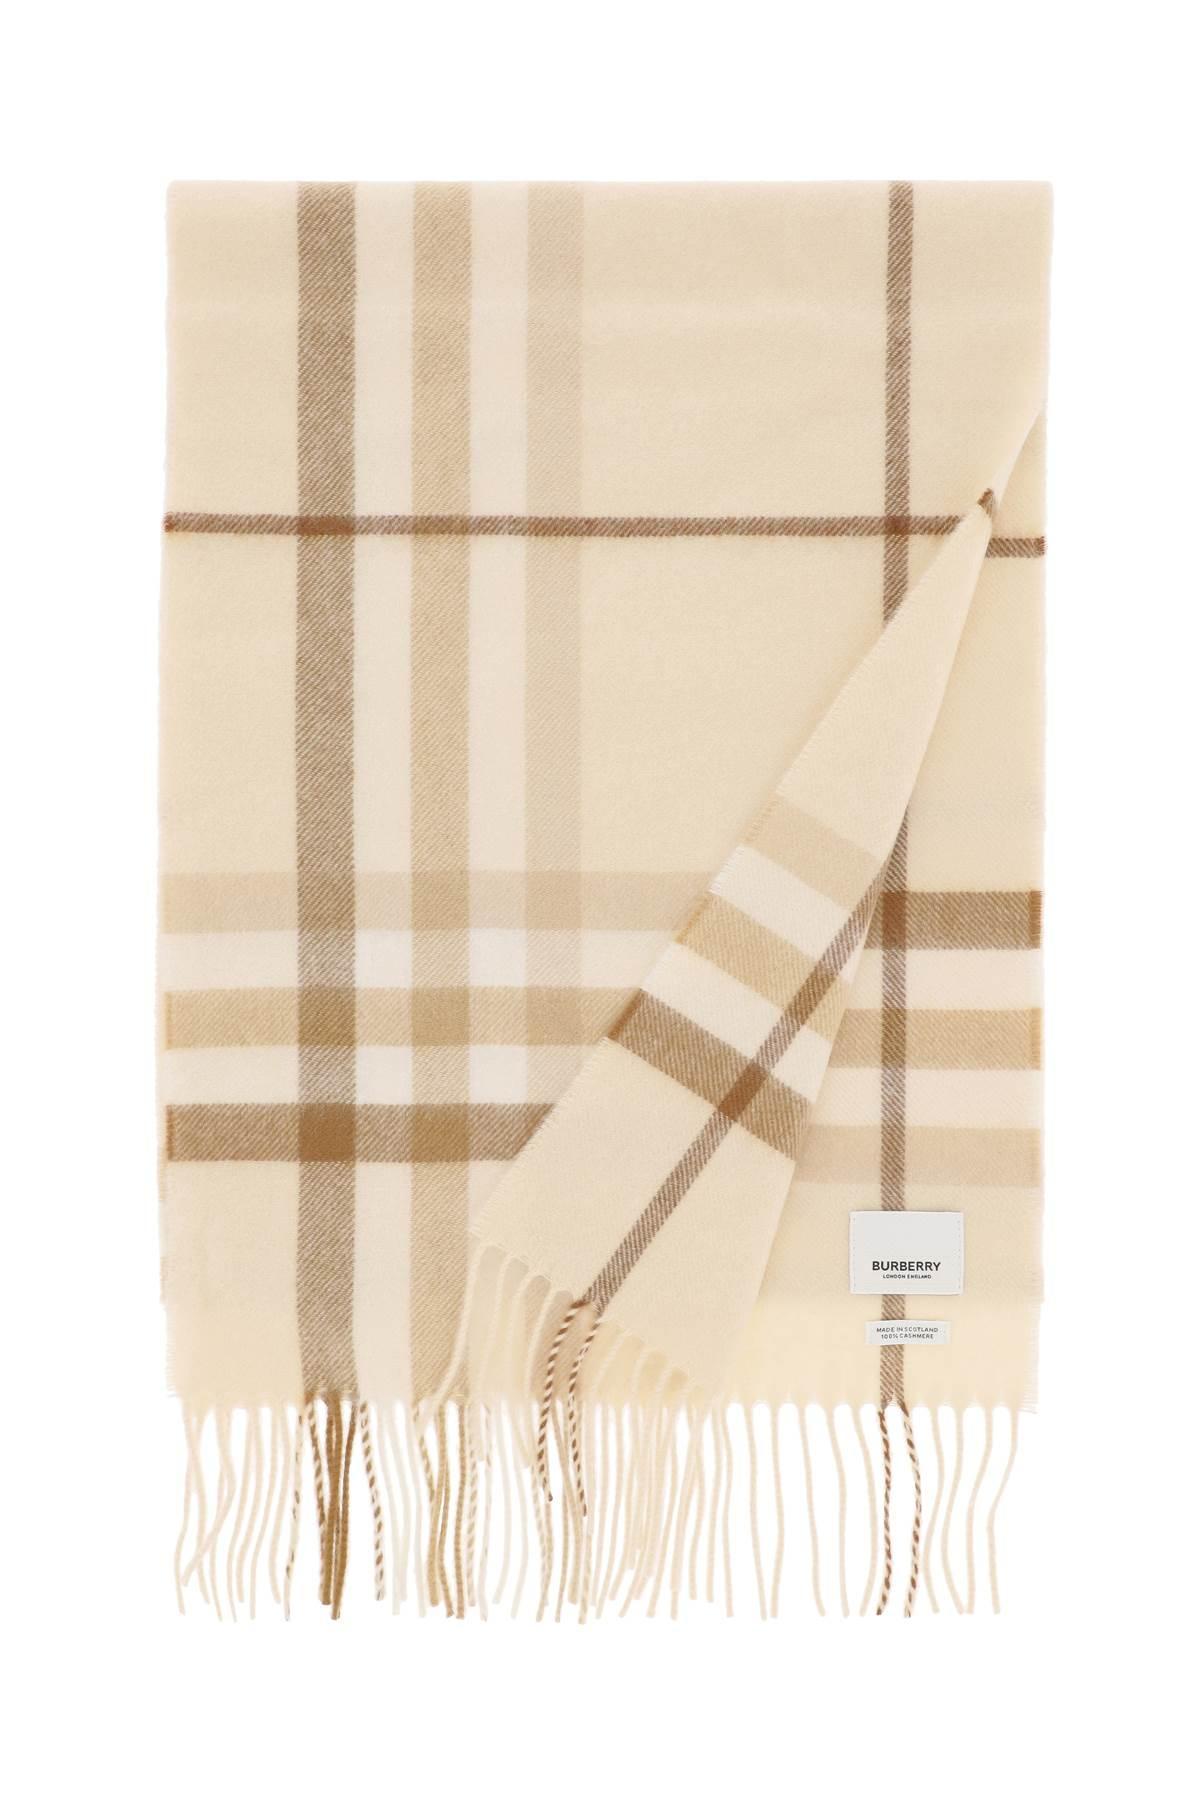 Burberry Tartan Cashmere Scarf in Natural for Men | Lyst